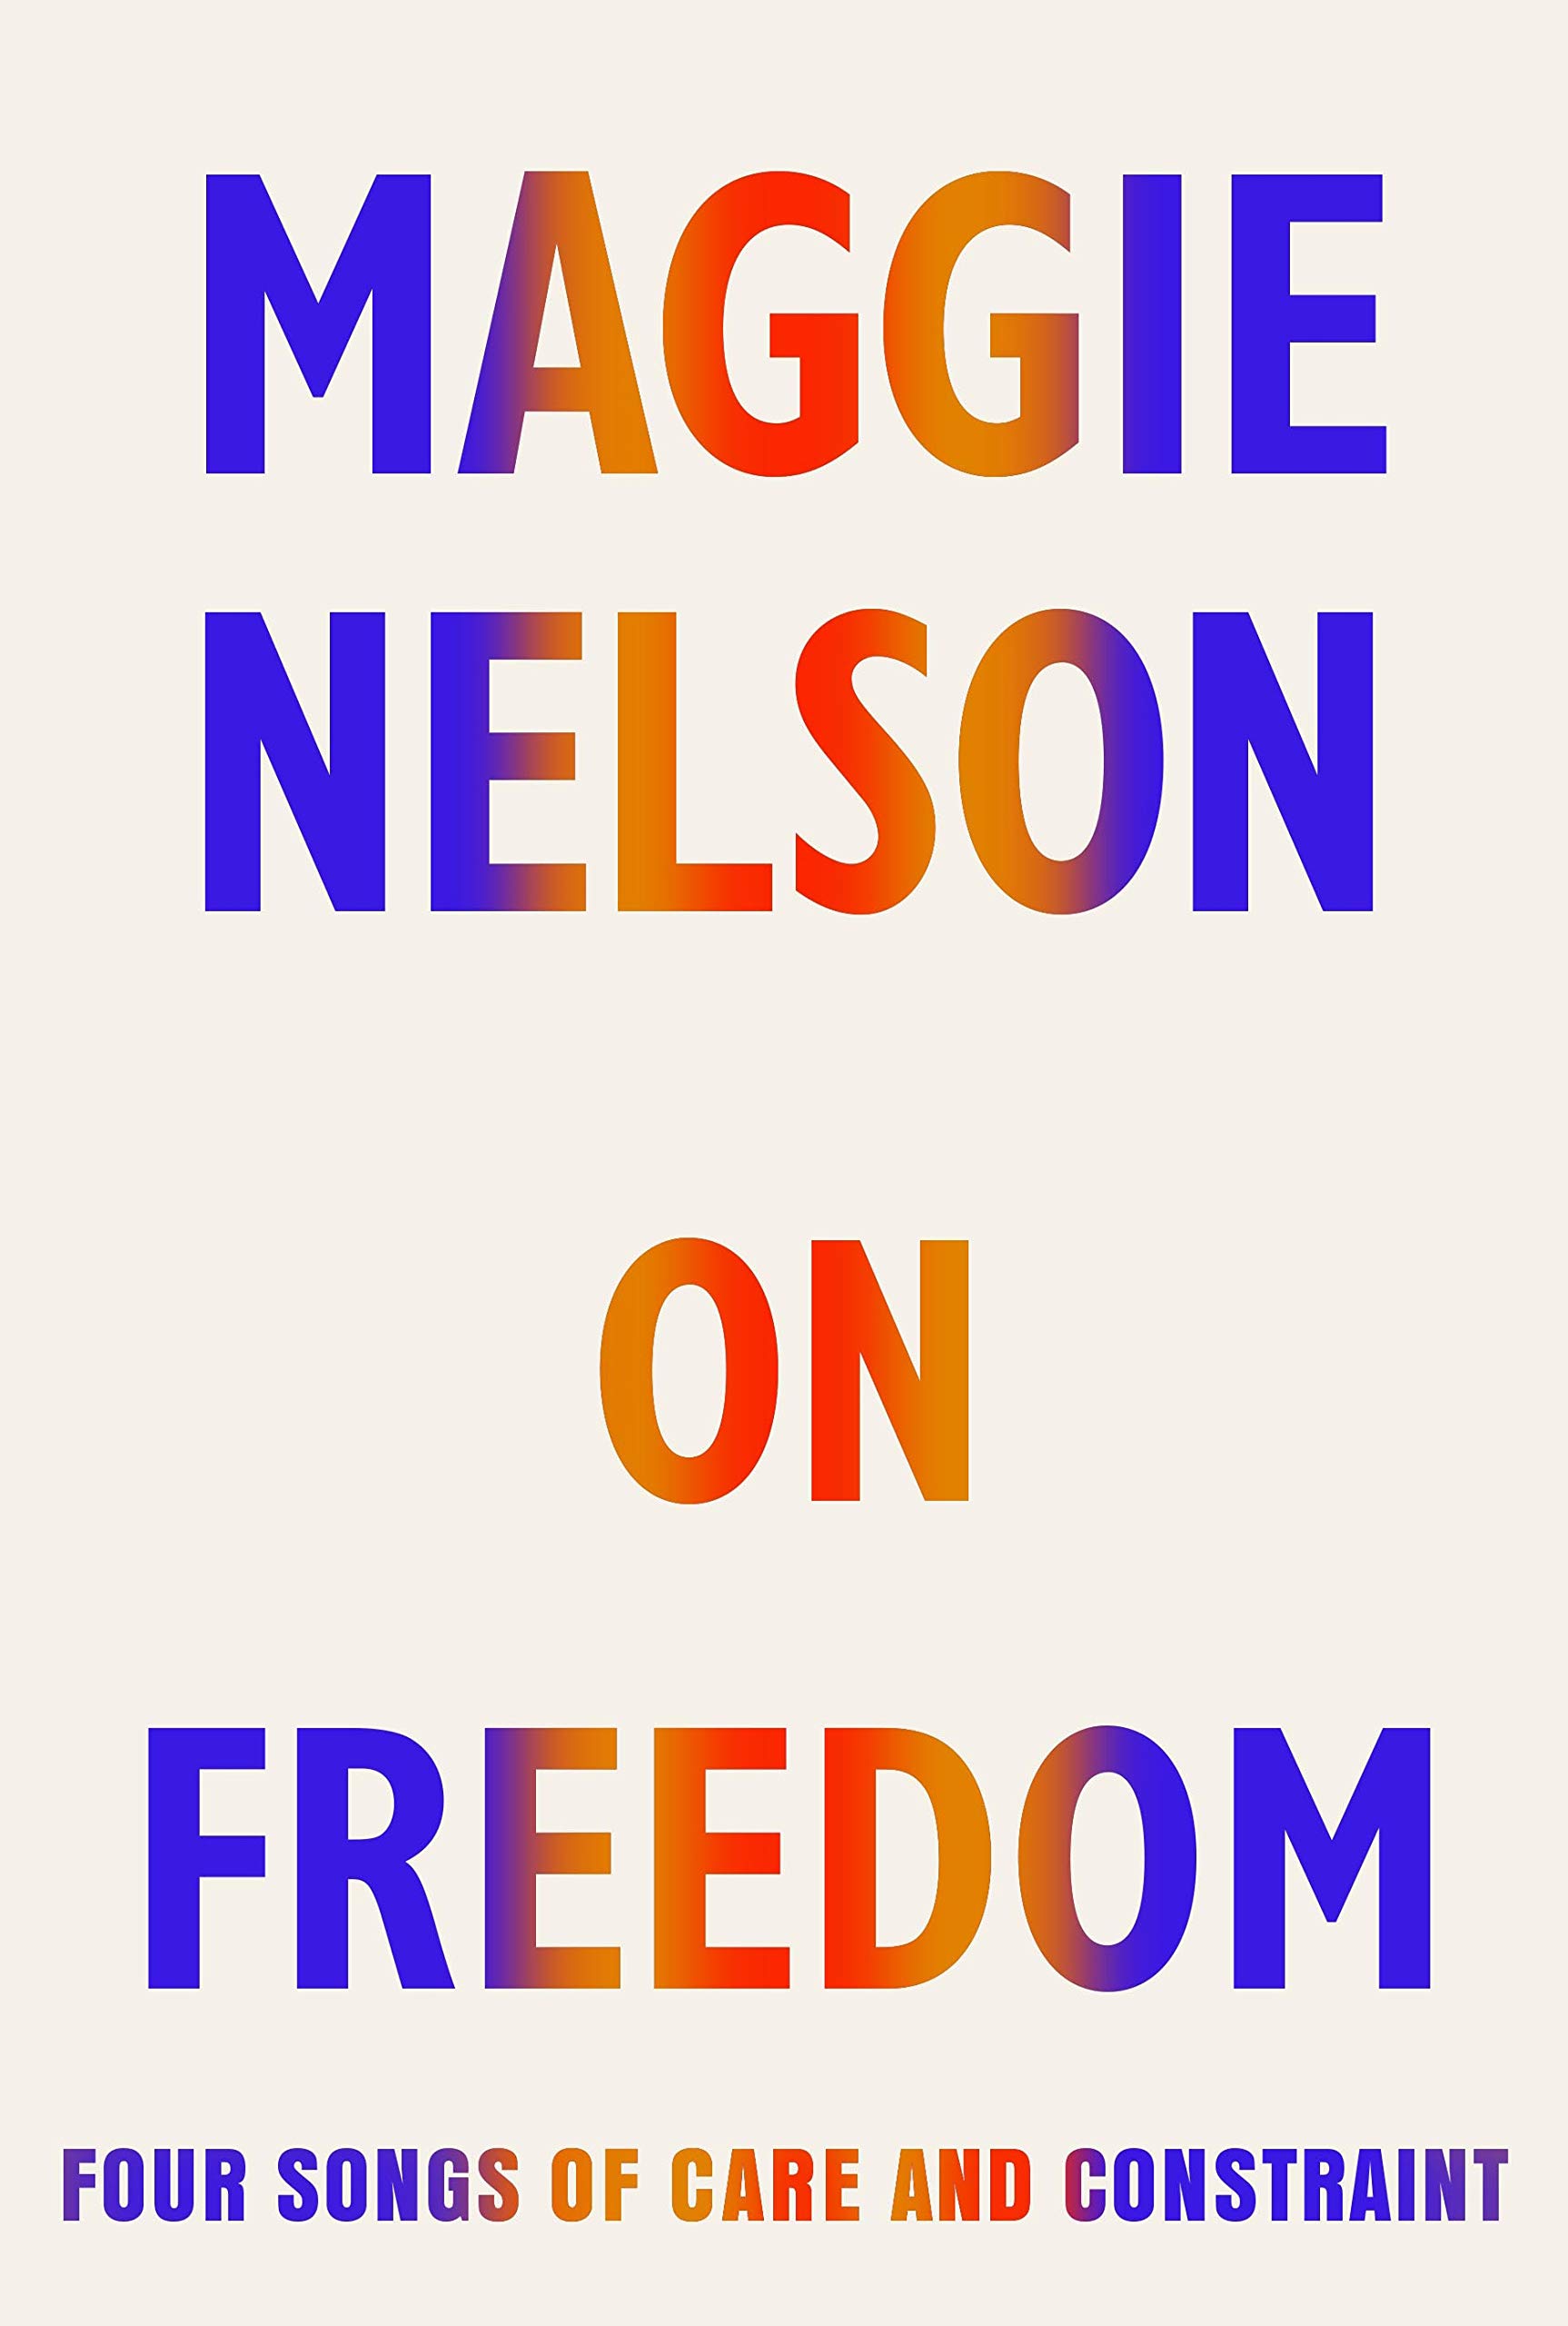 On Freedom | Maggie Nelson